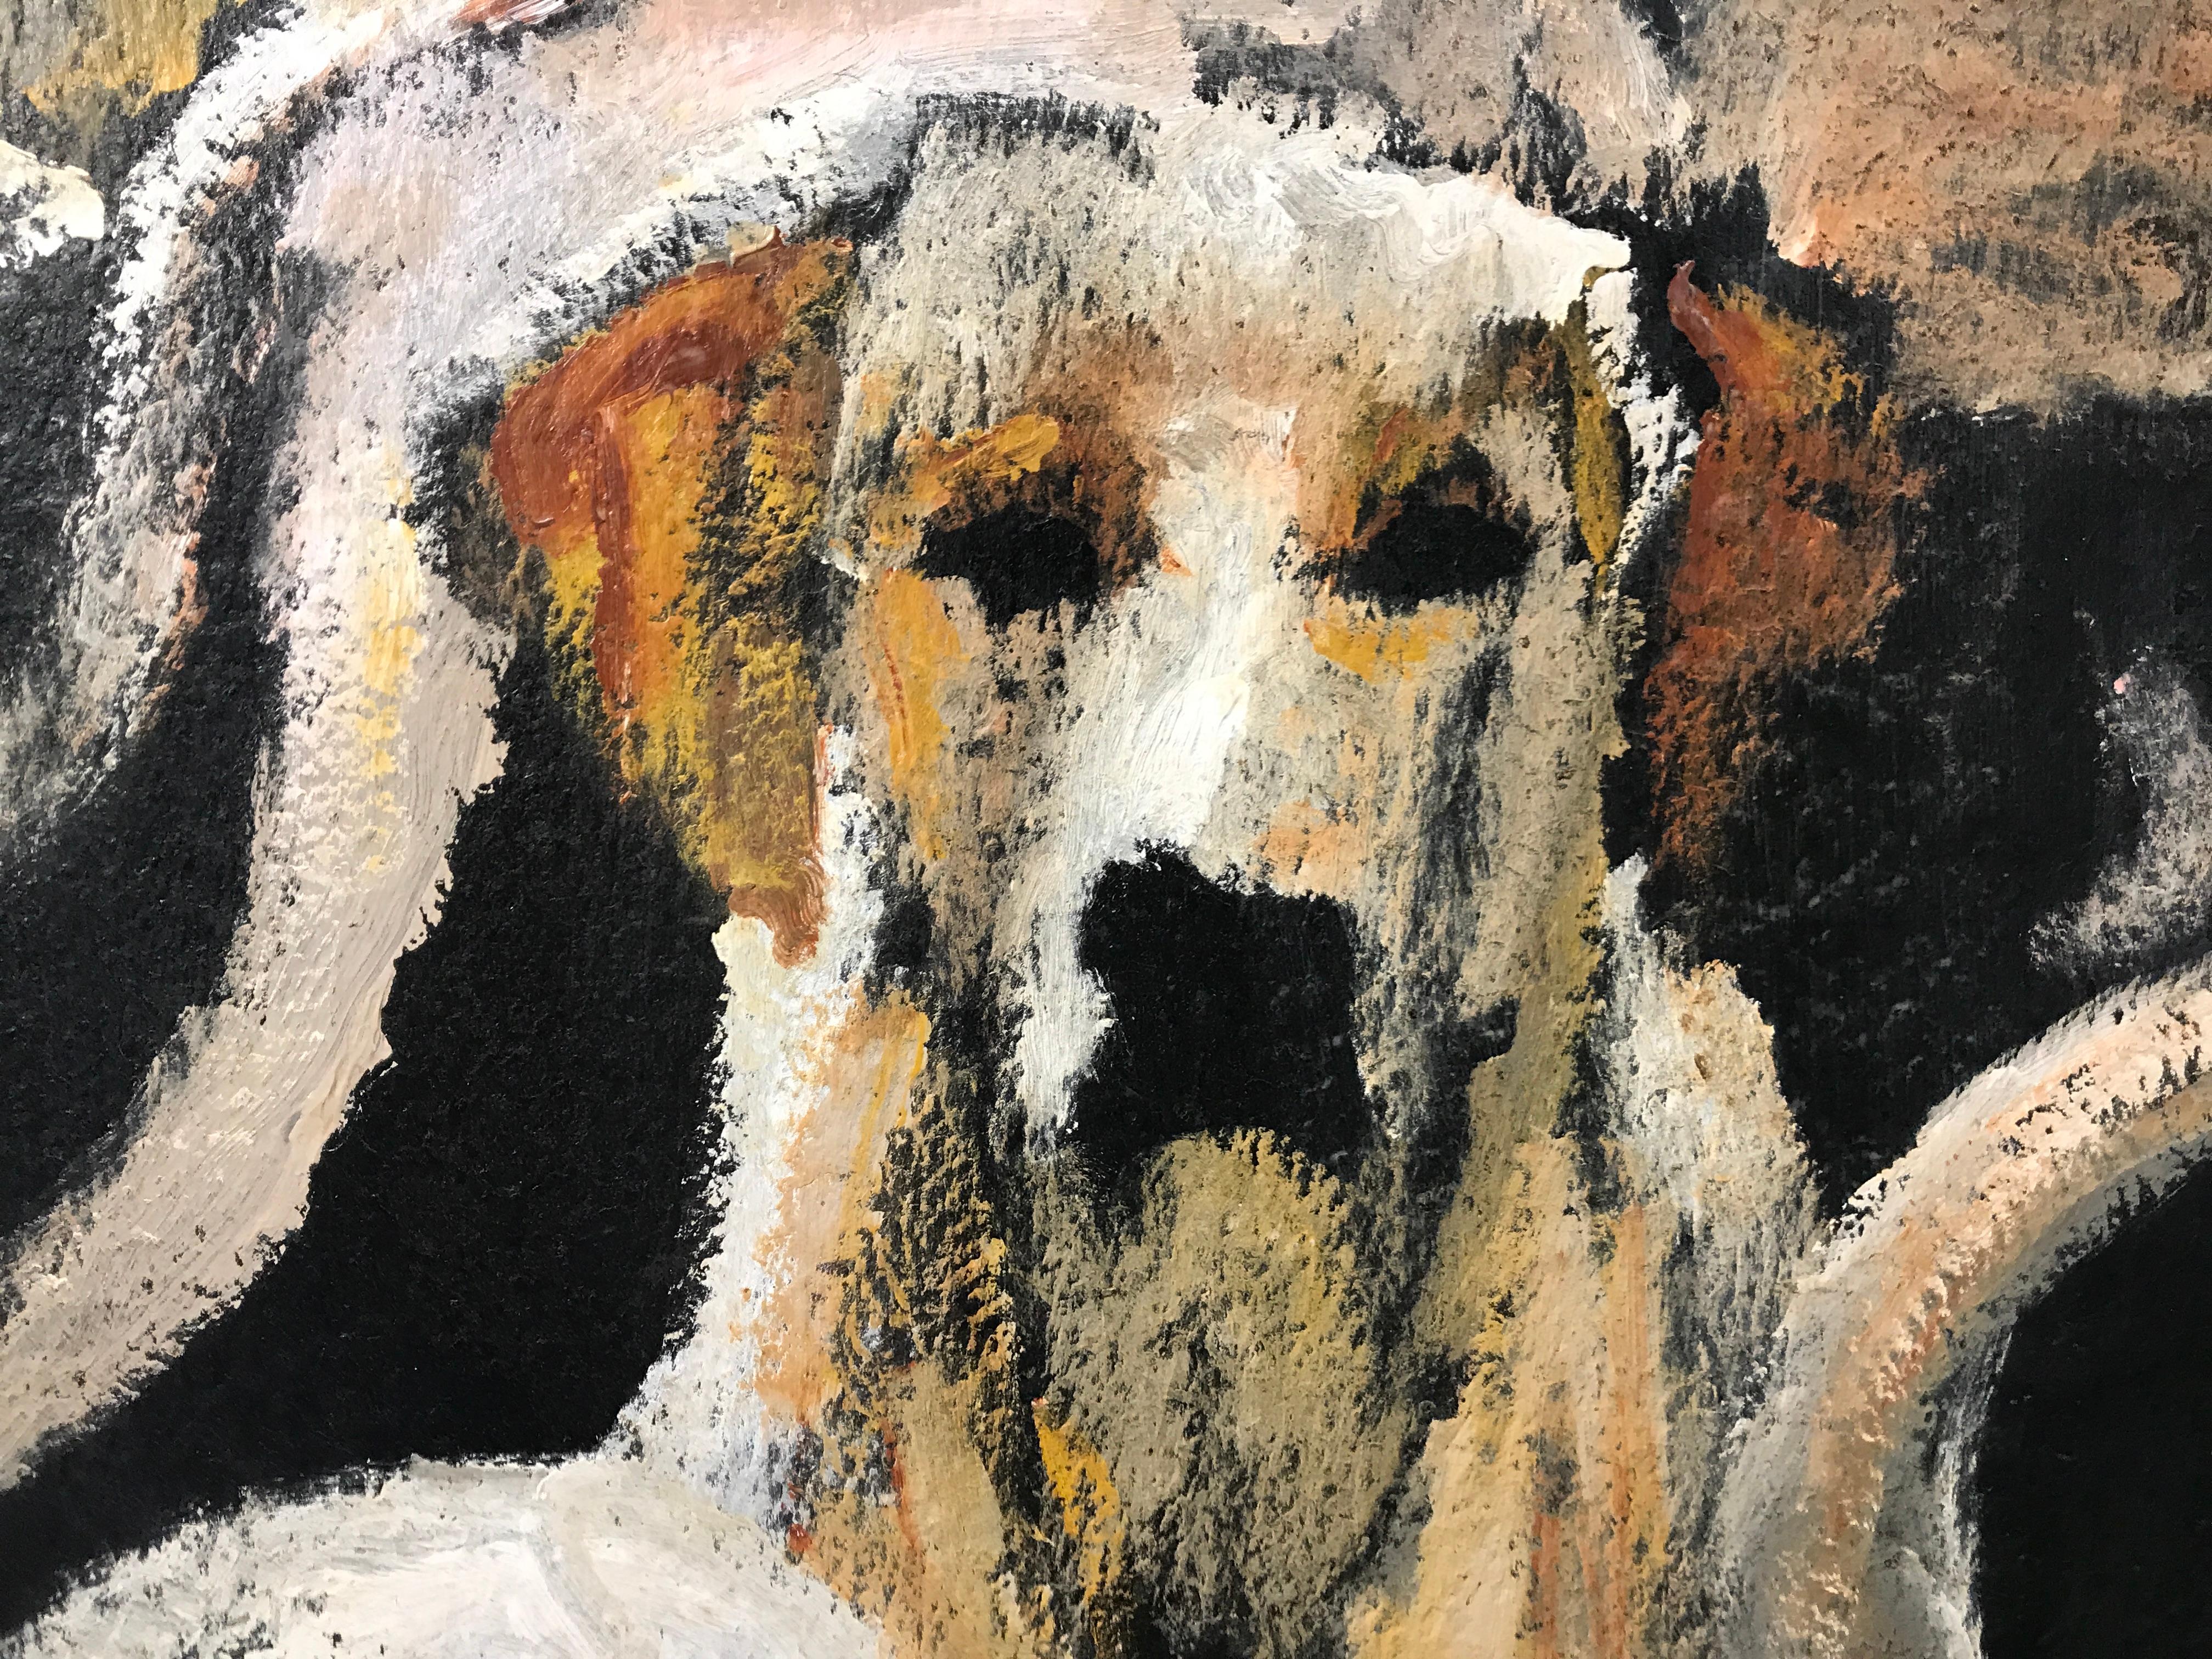 'Never Leave You' is a large framed contemporary mixed media on tar paper dog painting of vertical format created by American artist Carylon Killebrew in 2019. Featuring a palette made of russet, brown, black, white and beige tones, the painting